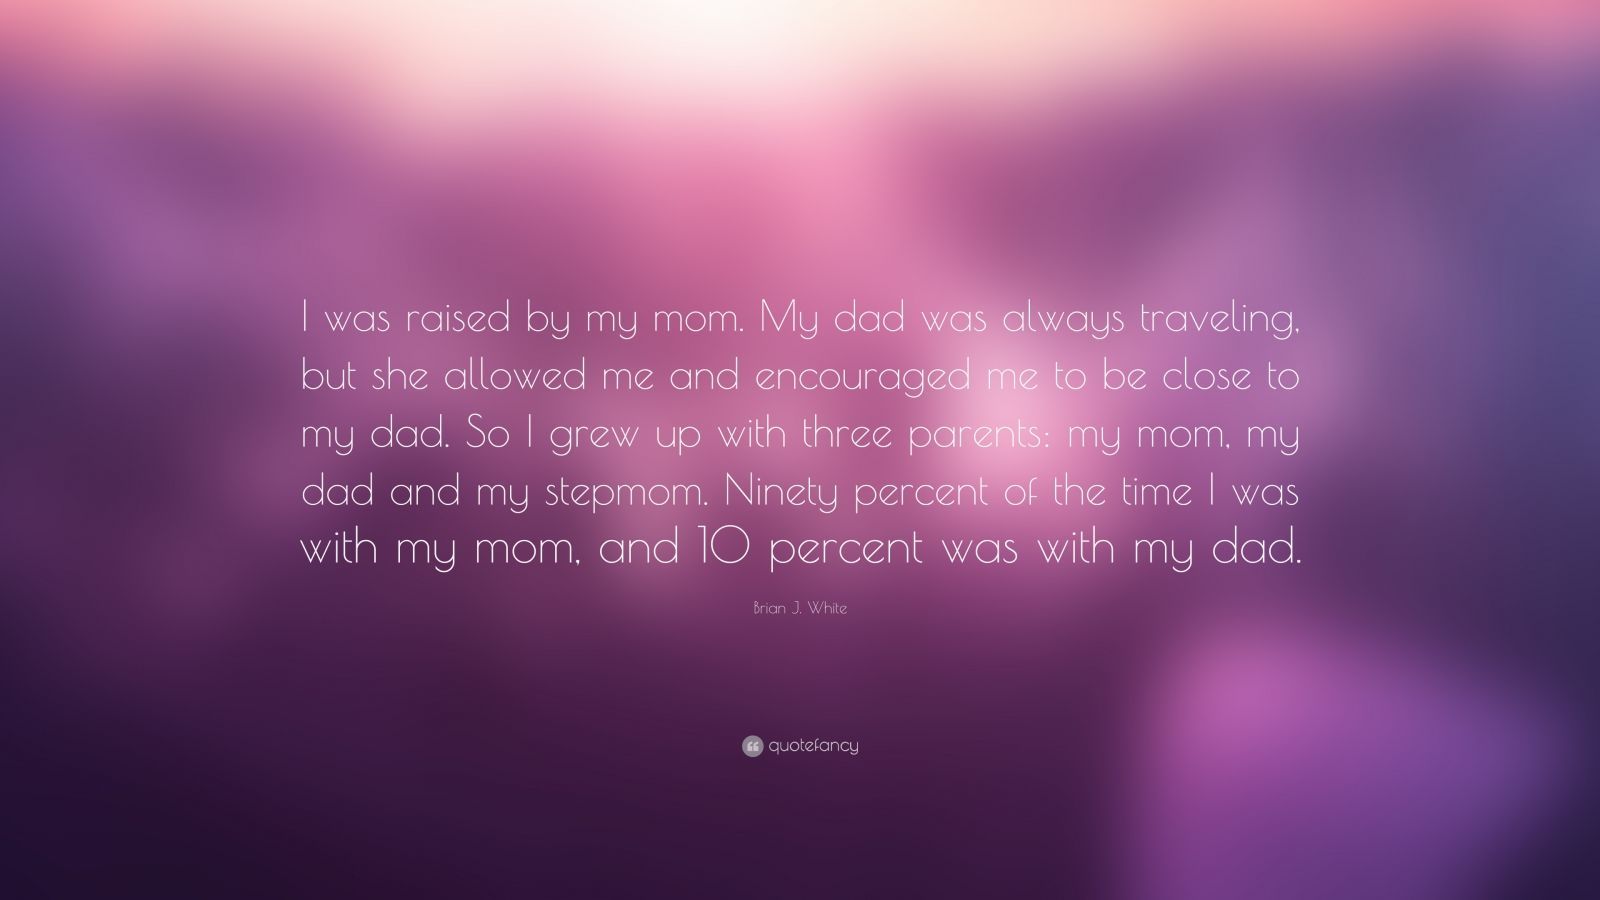 Brian J. White Quote: “I was raised by my mom. My dad was always